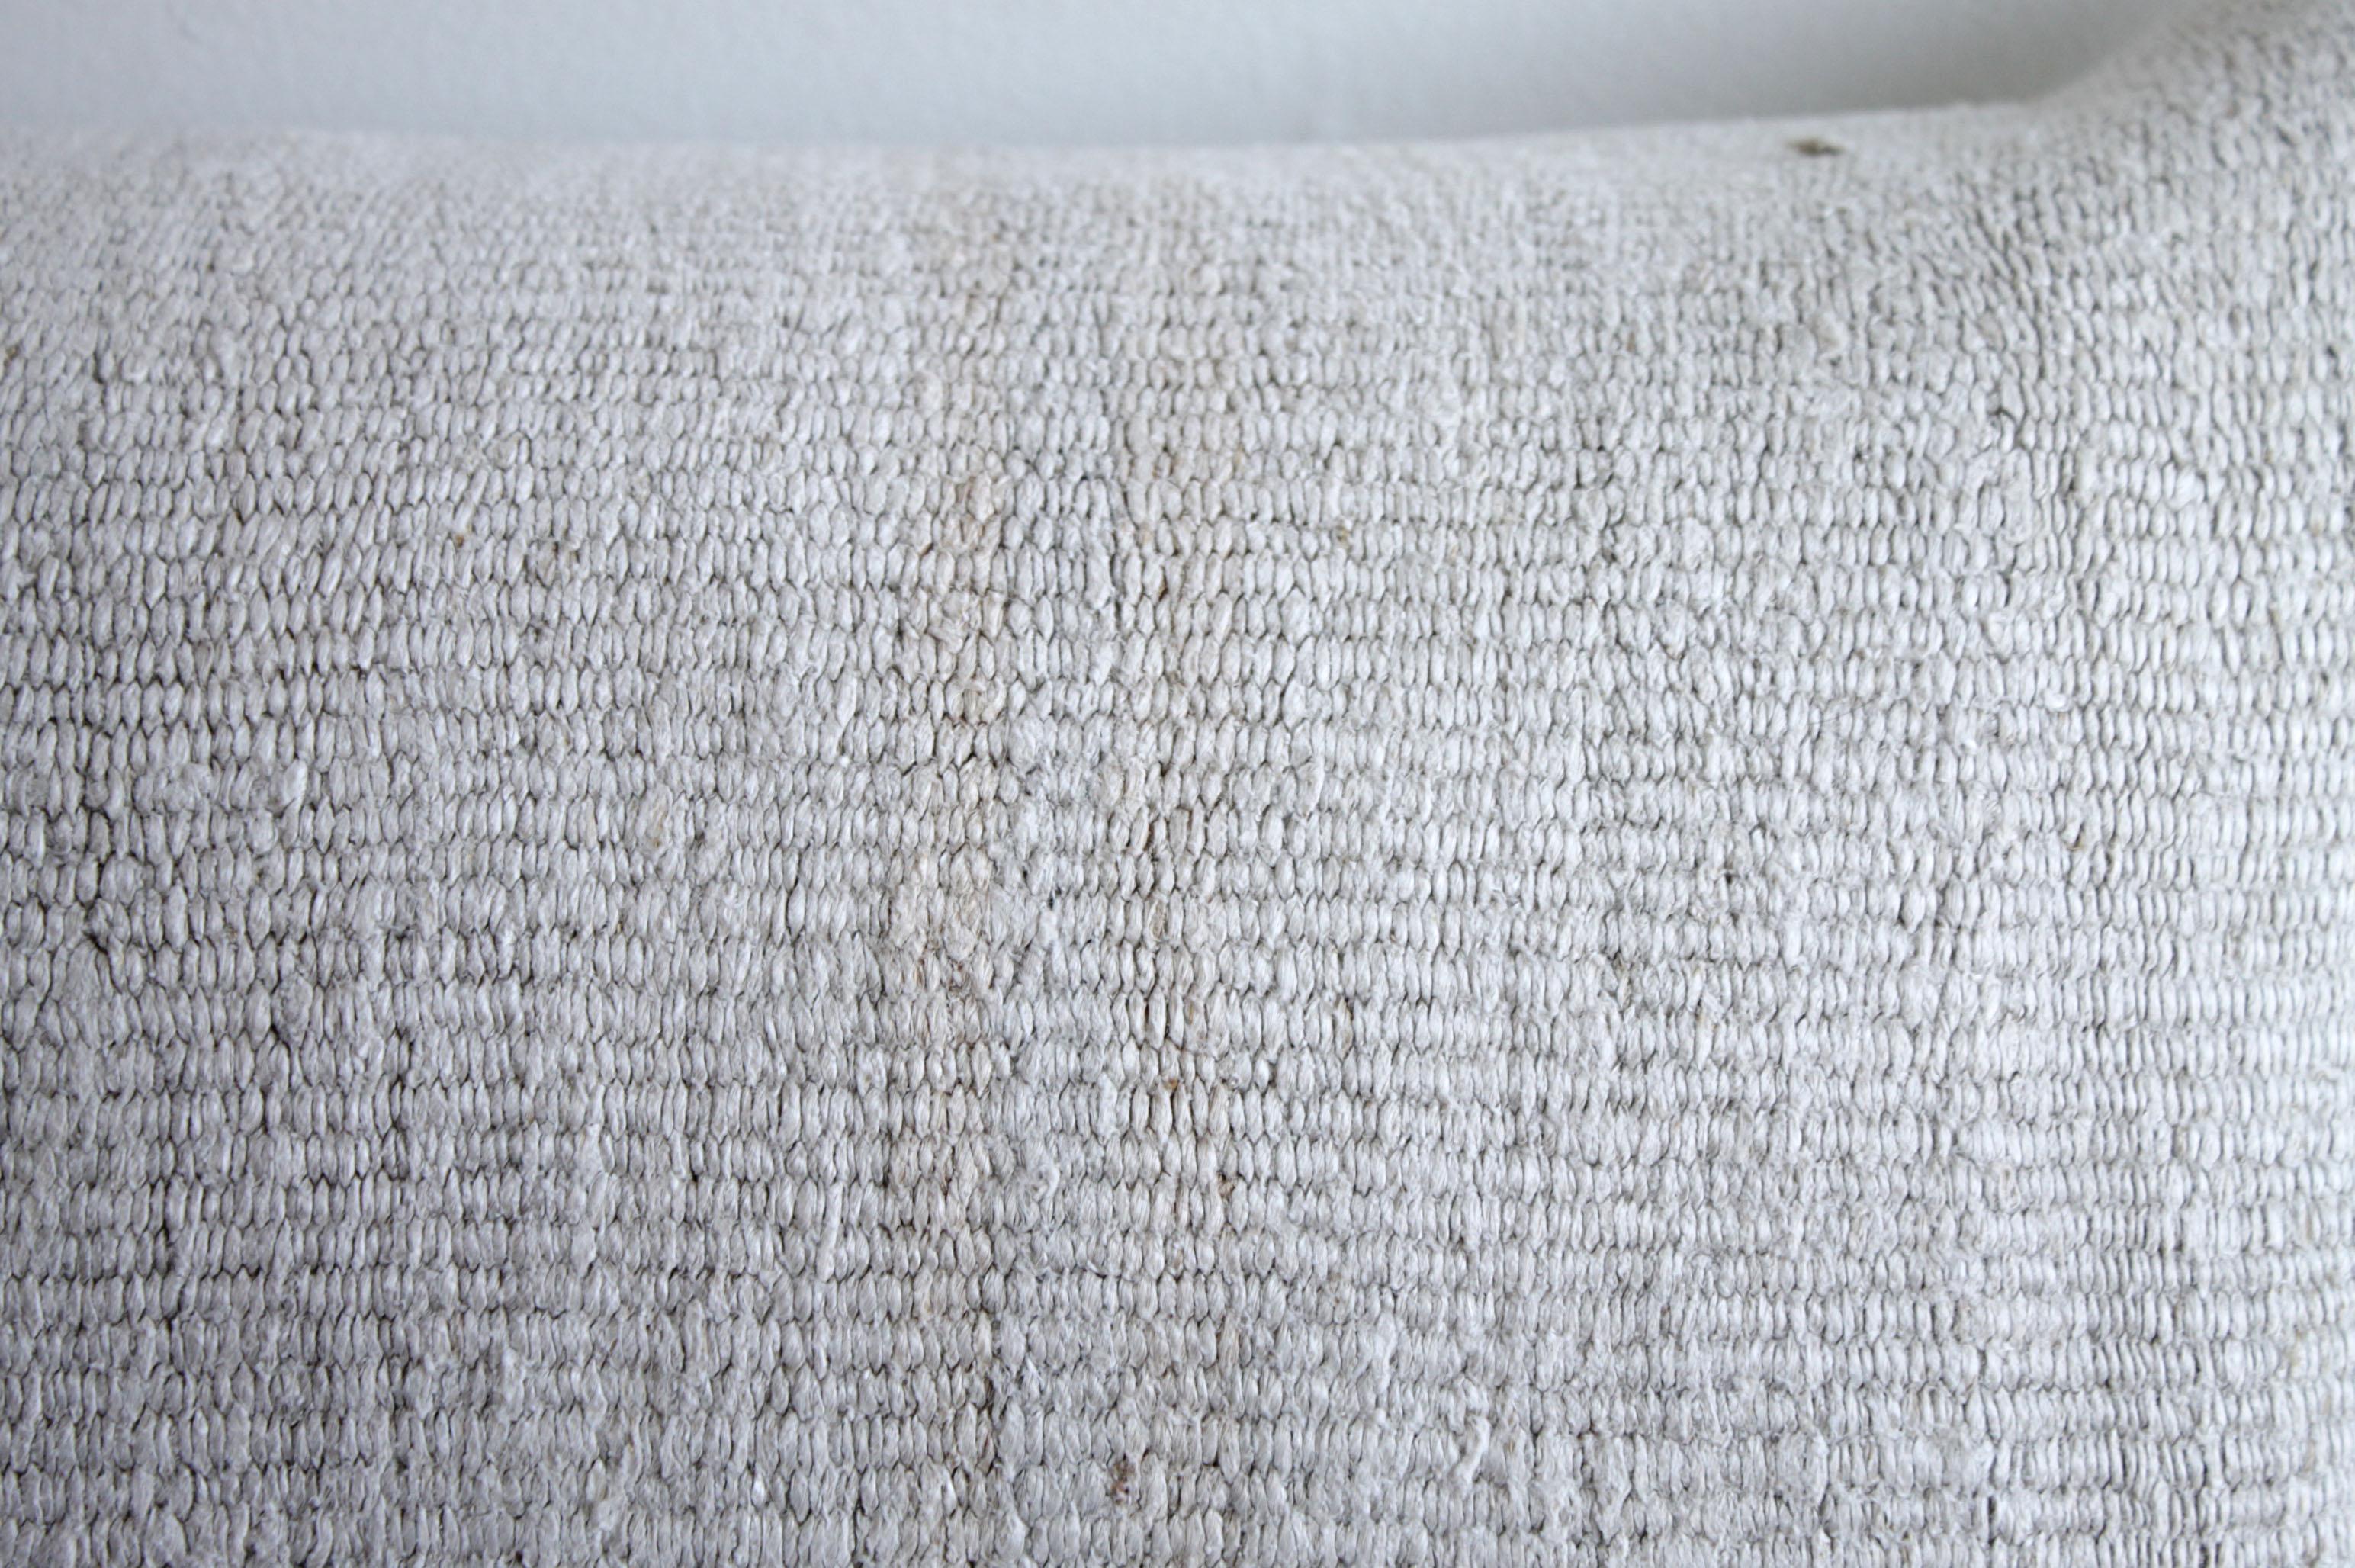 Natural creamy white Turkish hemp rug lumbar pillow
Unique pillow has been made with a Turkish rug, in multiple white tones, and some variations of white woven through. The face is fully lined, with a coordinating backing in a solid fabric, and